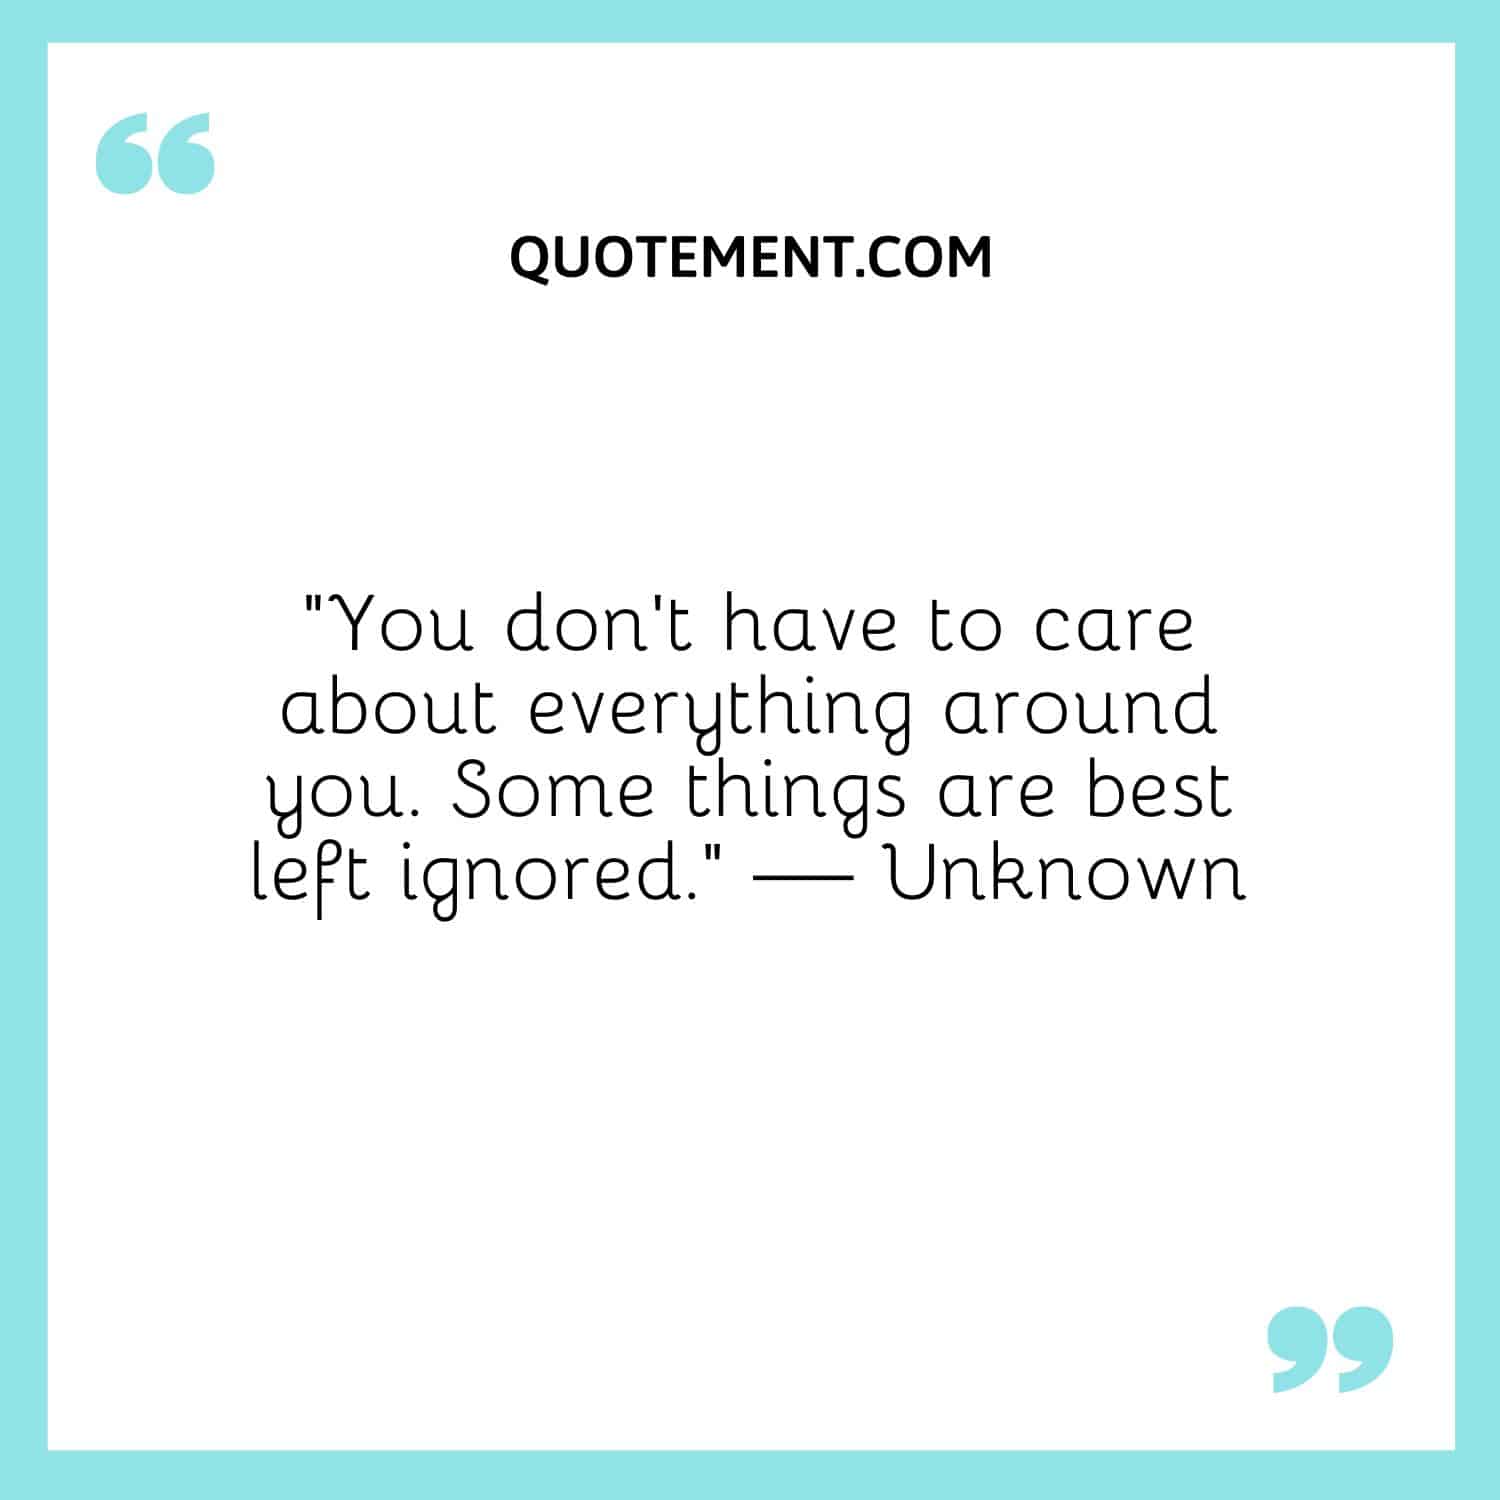 You don’t have to care about everything around you. Some things are best left ignored